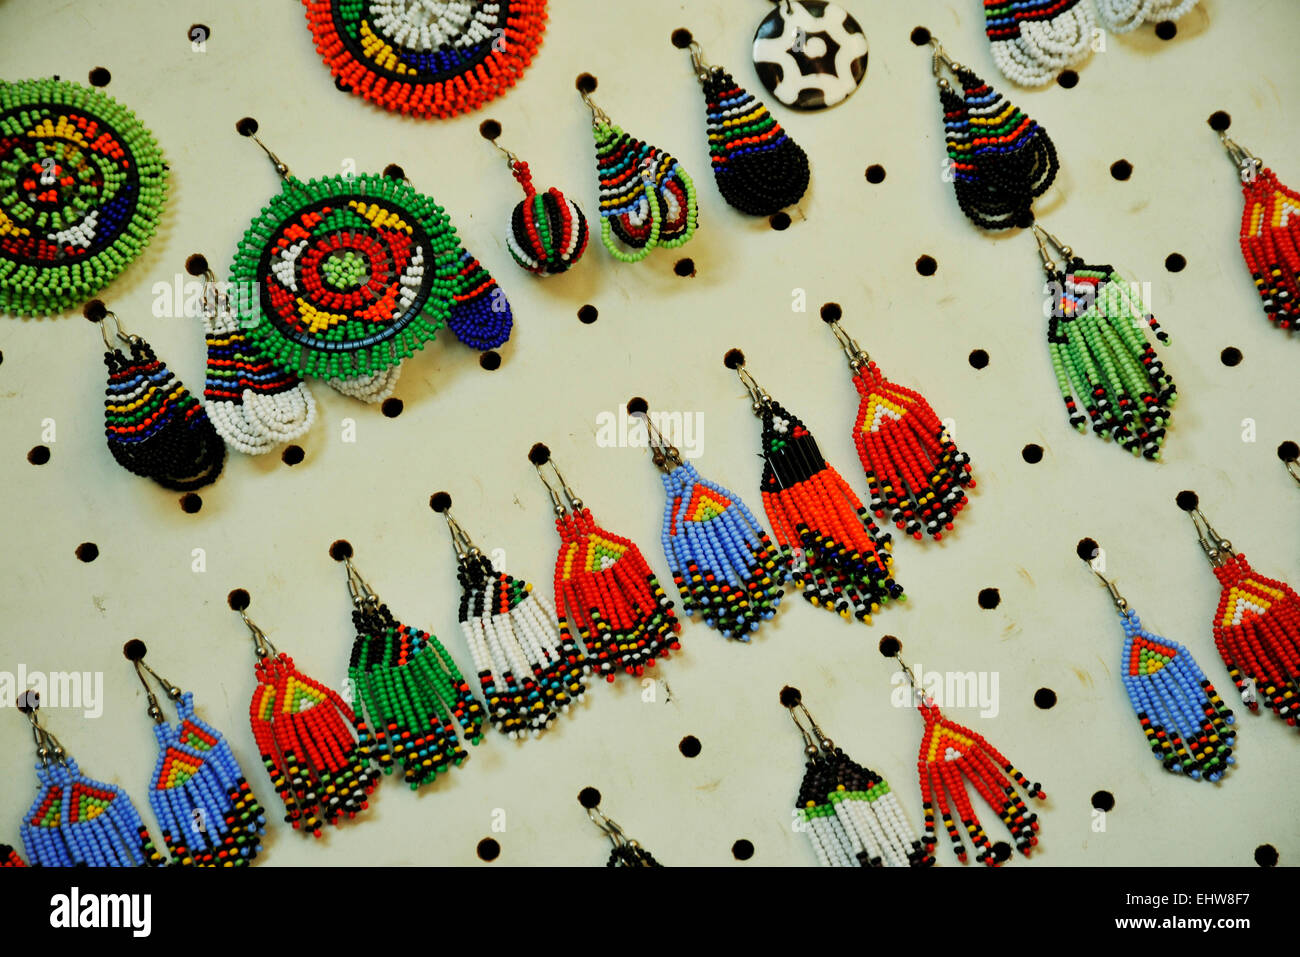 Curio shop display with rows of multi-coloured earrings in traditional Zulu beadwork style, tourist souvenirs for sale in South Africa Stock Photo